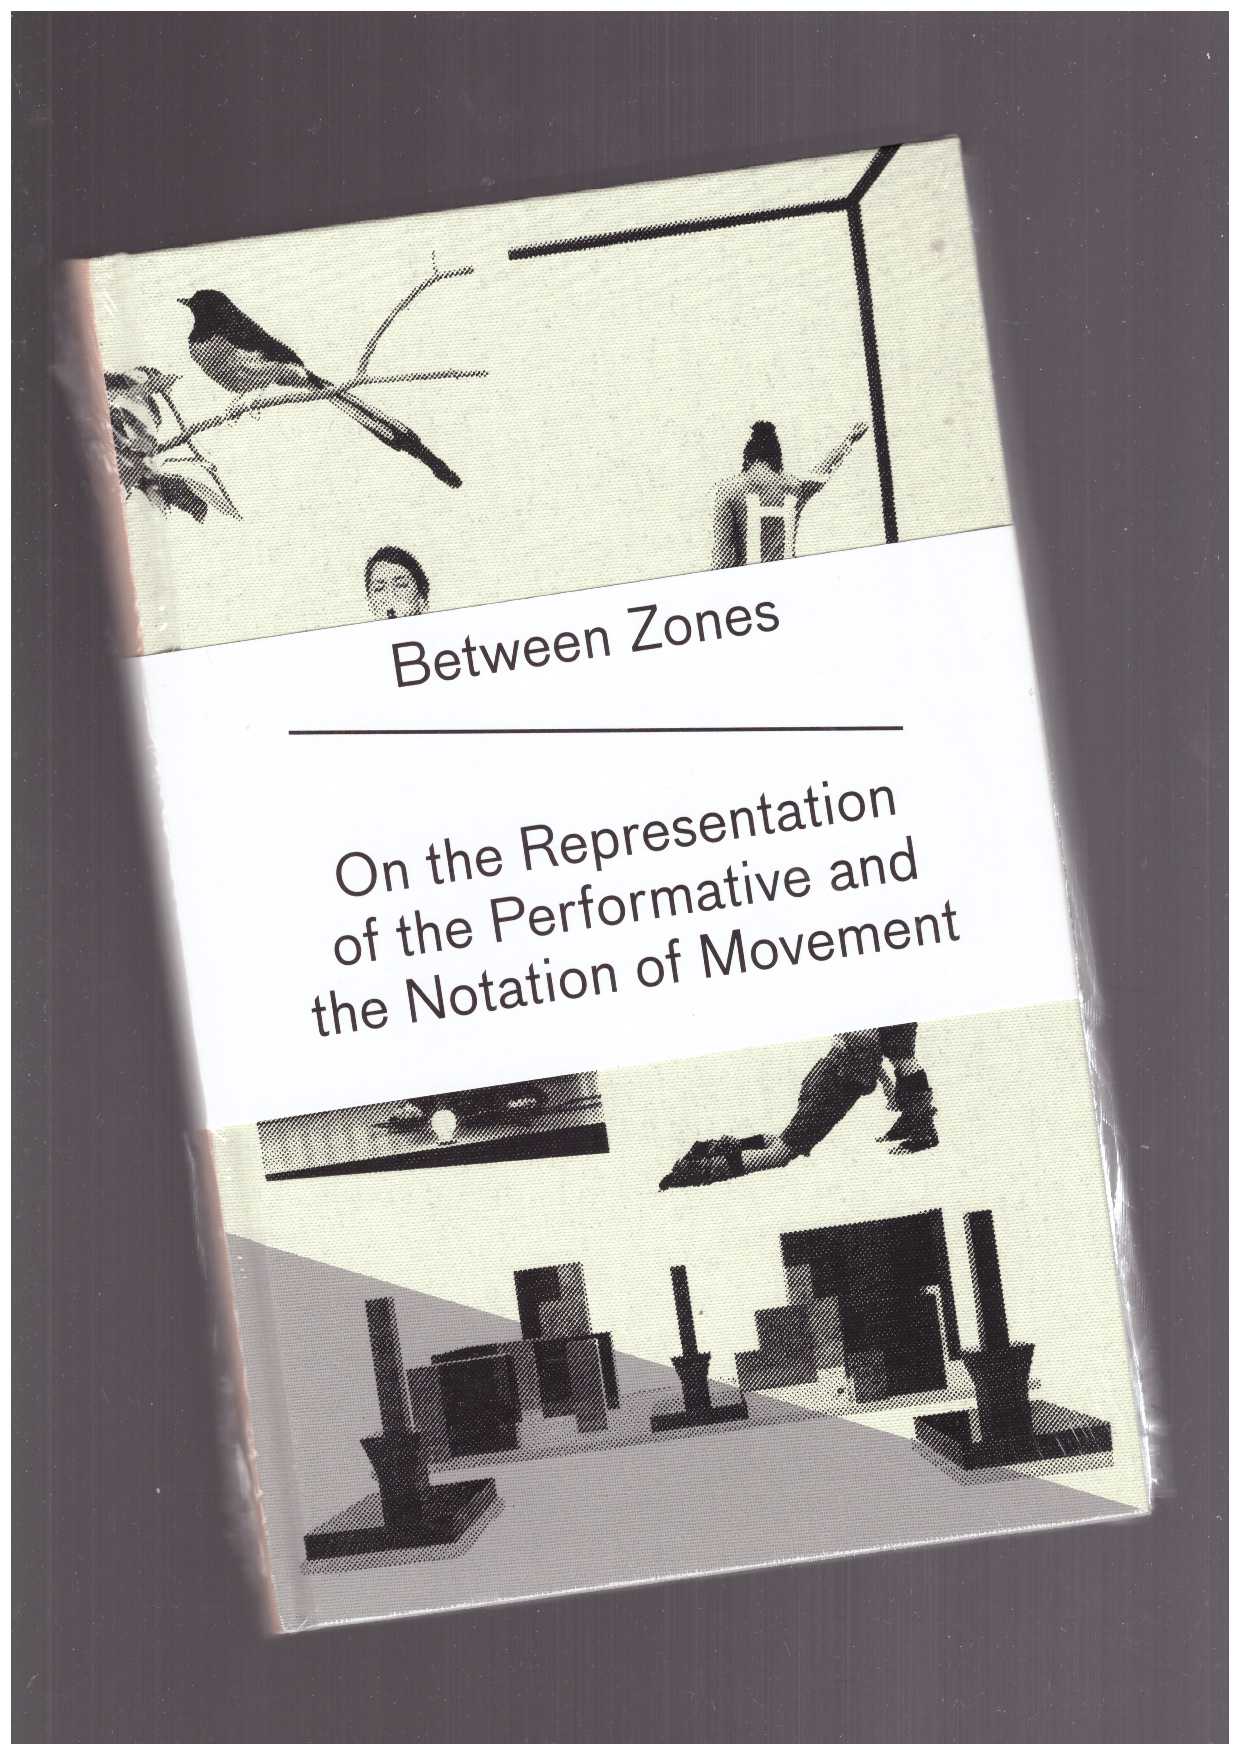  GYGAX, Raphael; MUNER, Heike (eds.) - Between Zones. On the Representation of the Performative and the Notation of Movement